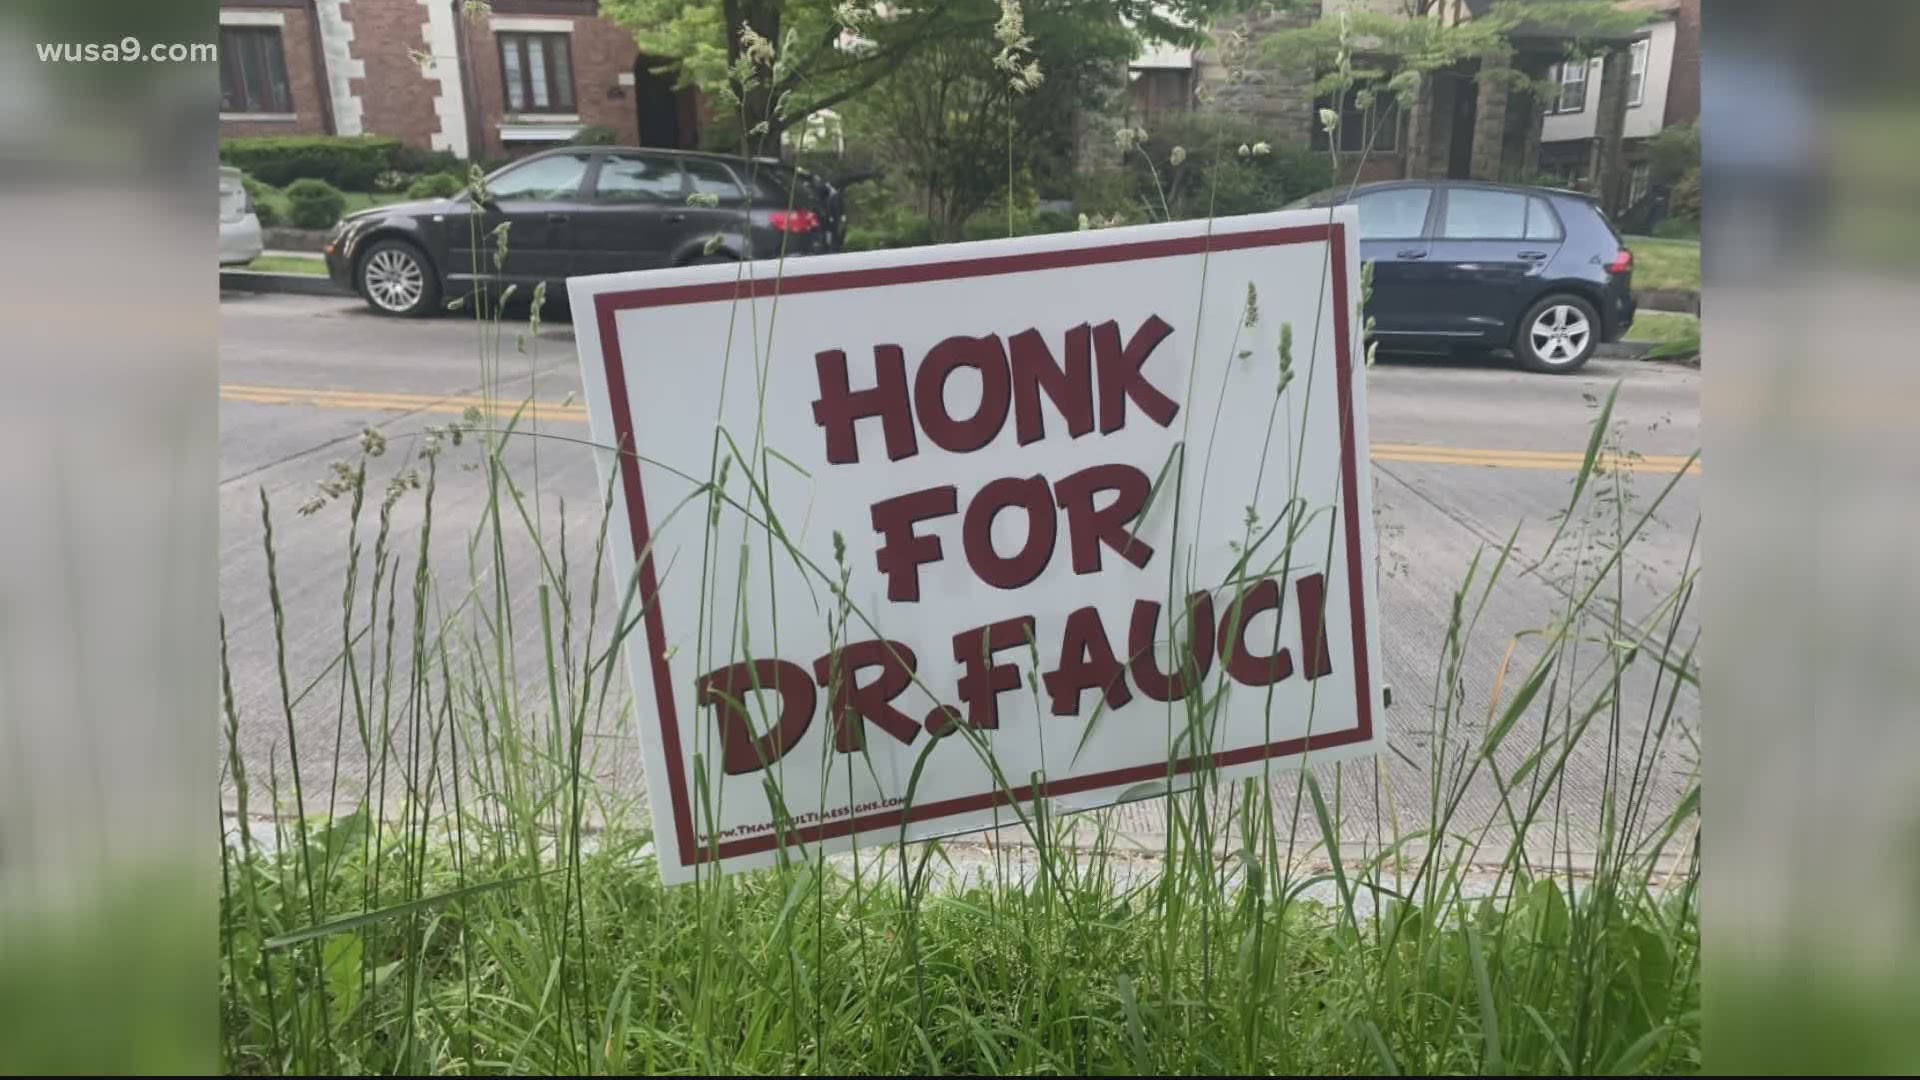 Only in a city as highly educated as D.C. would a doctor get a roadside tribute.